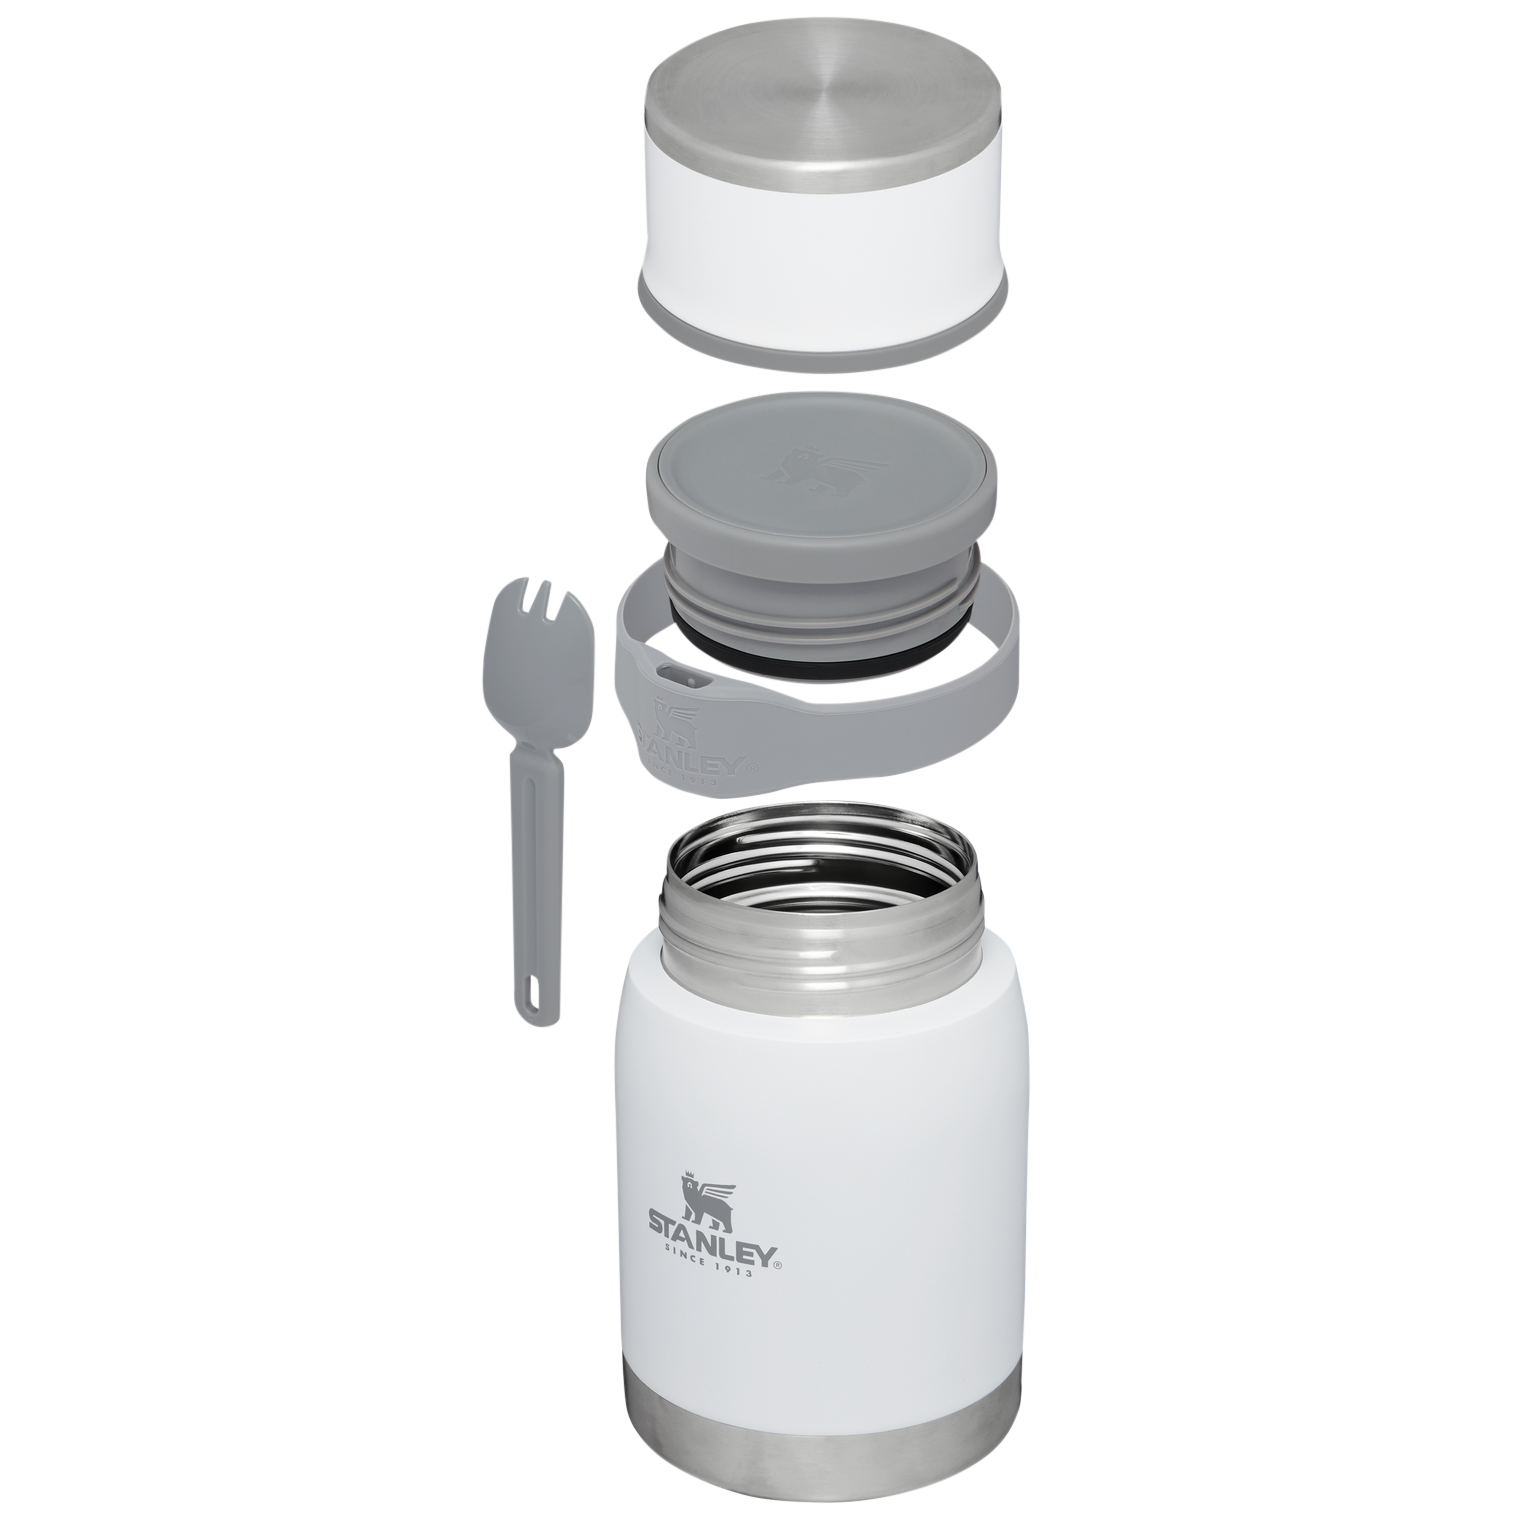  Stanley Adventure to Go Insulated Food Jar with Cup Lid and  Spork - 24oz - Stainless Steel Insulated Food Container - BPA-Free and  Dishwasher Safe : Home & Kitchen